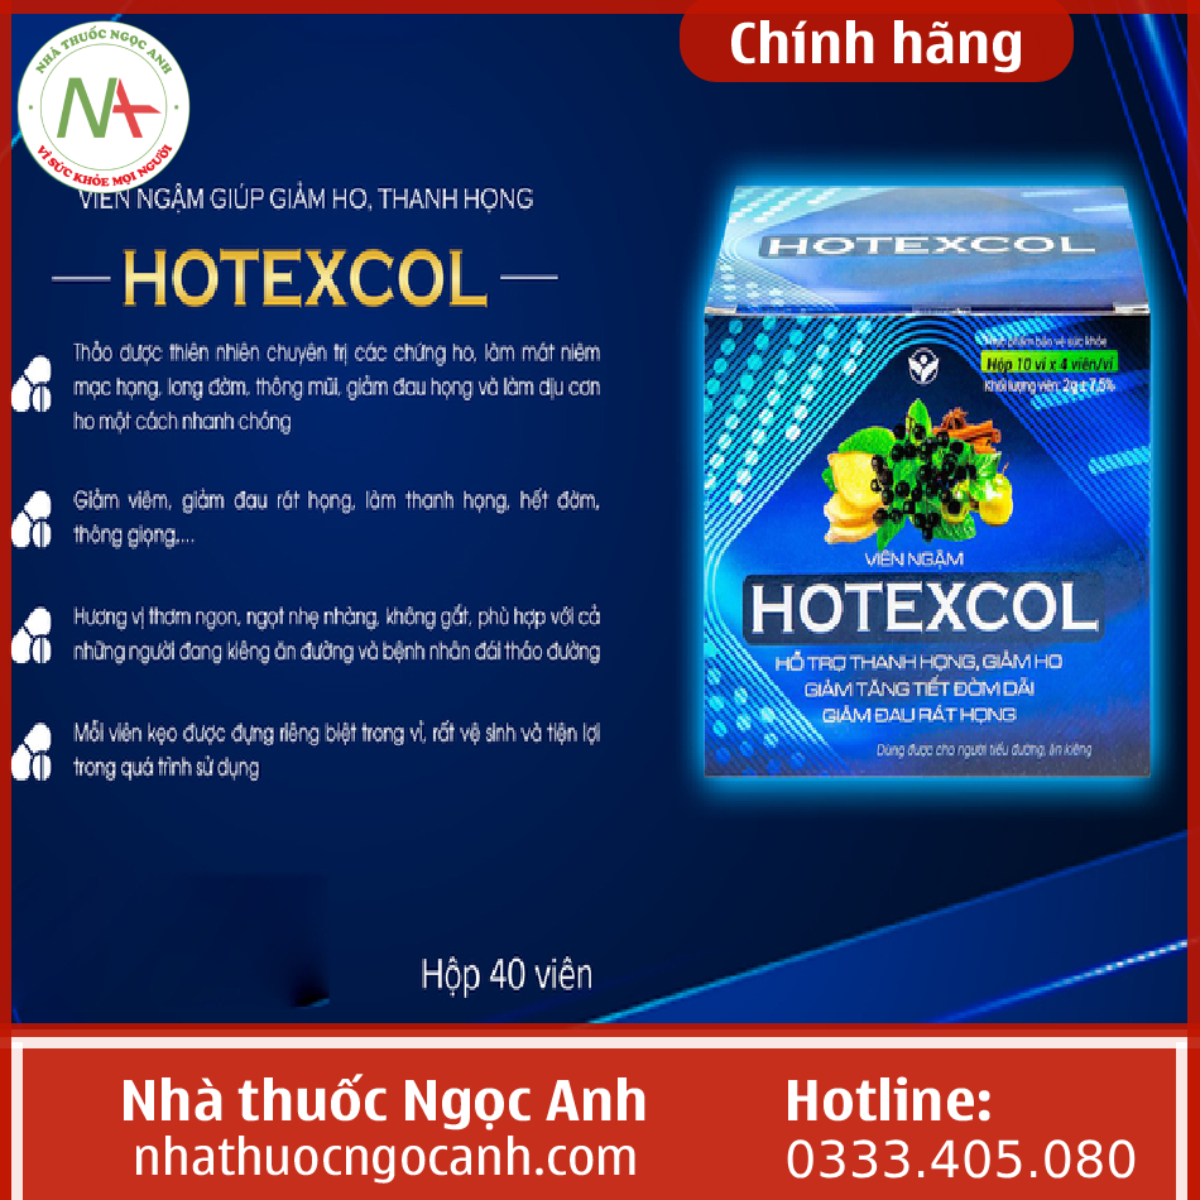 Hotexcol